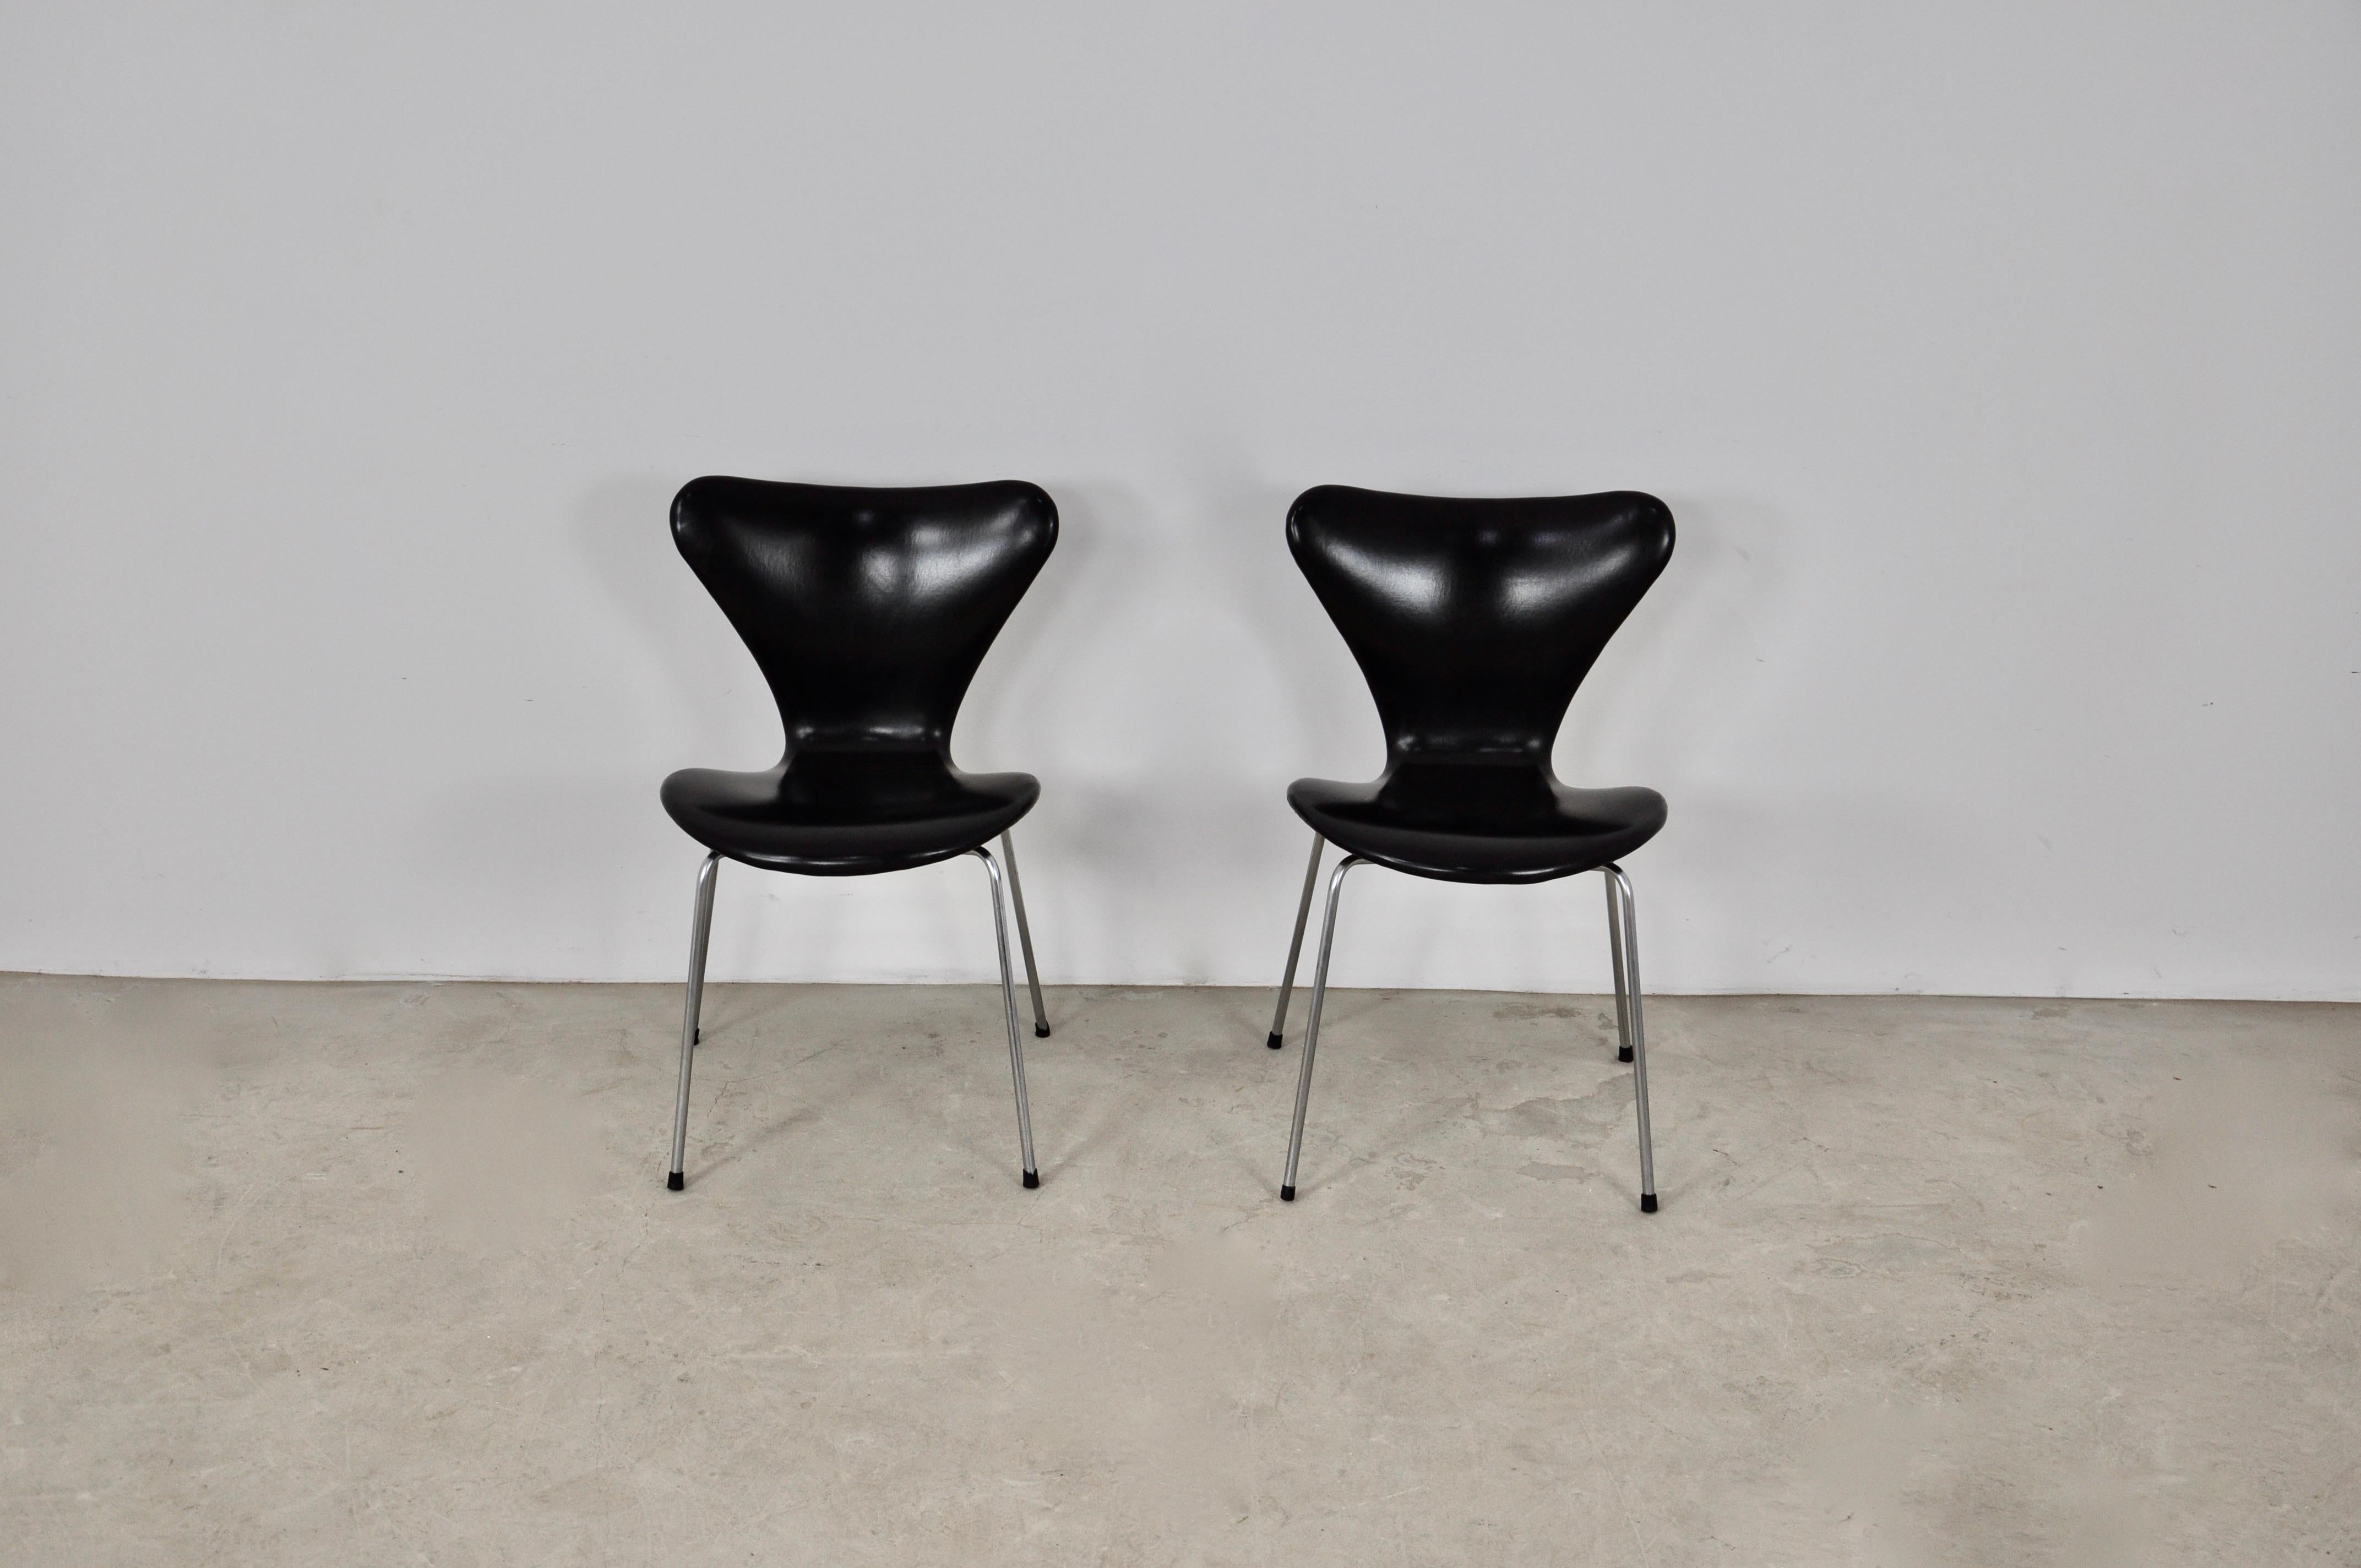 Pair of chairs in black color. Seat height: 43cm. Wear due to time and age of the chairs.